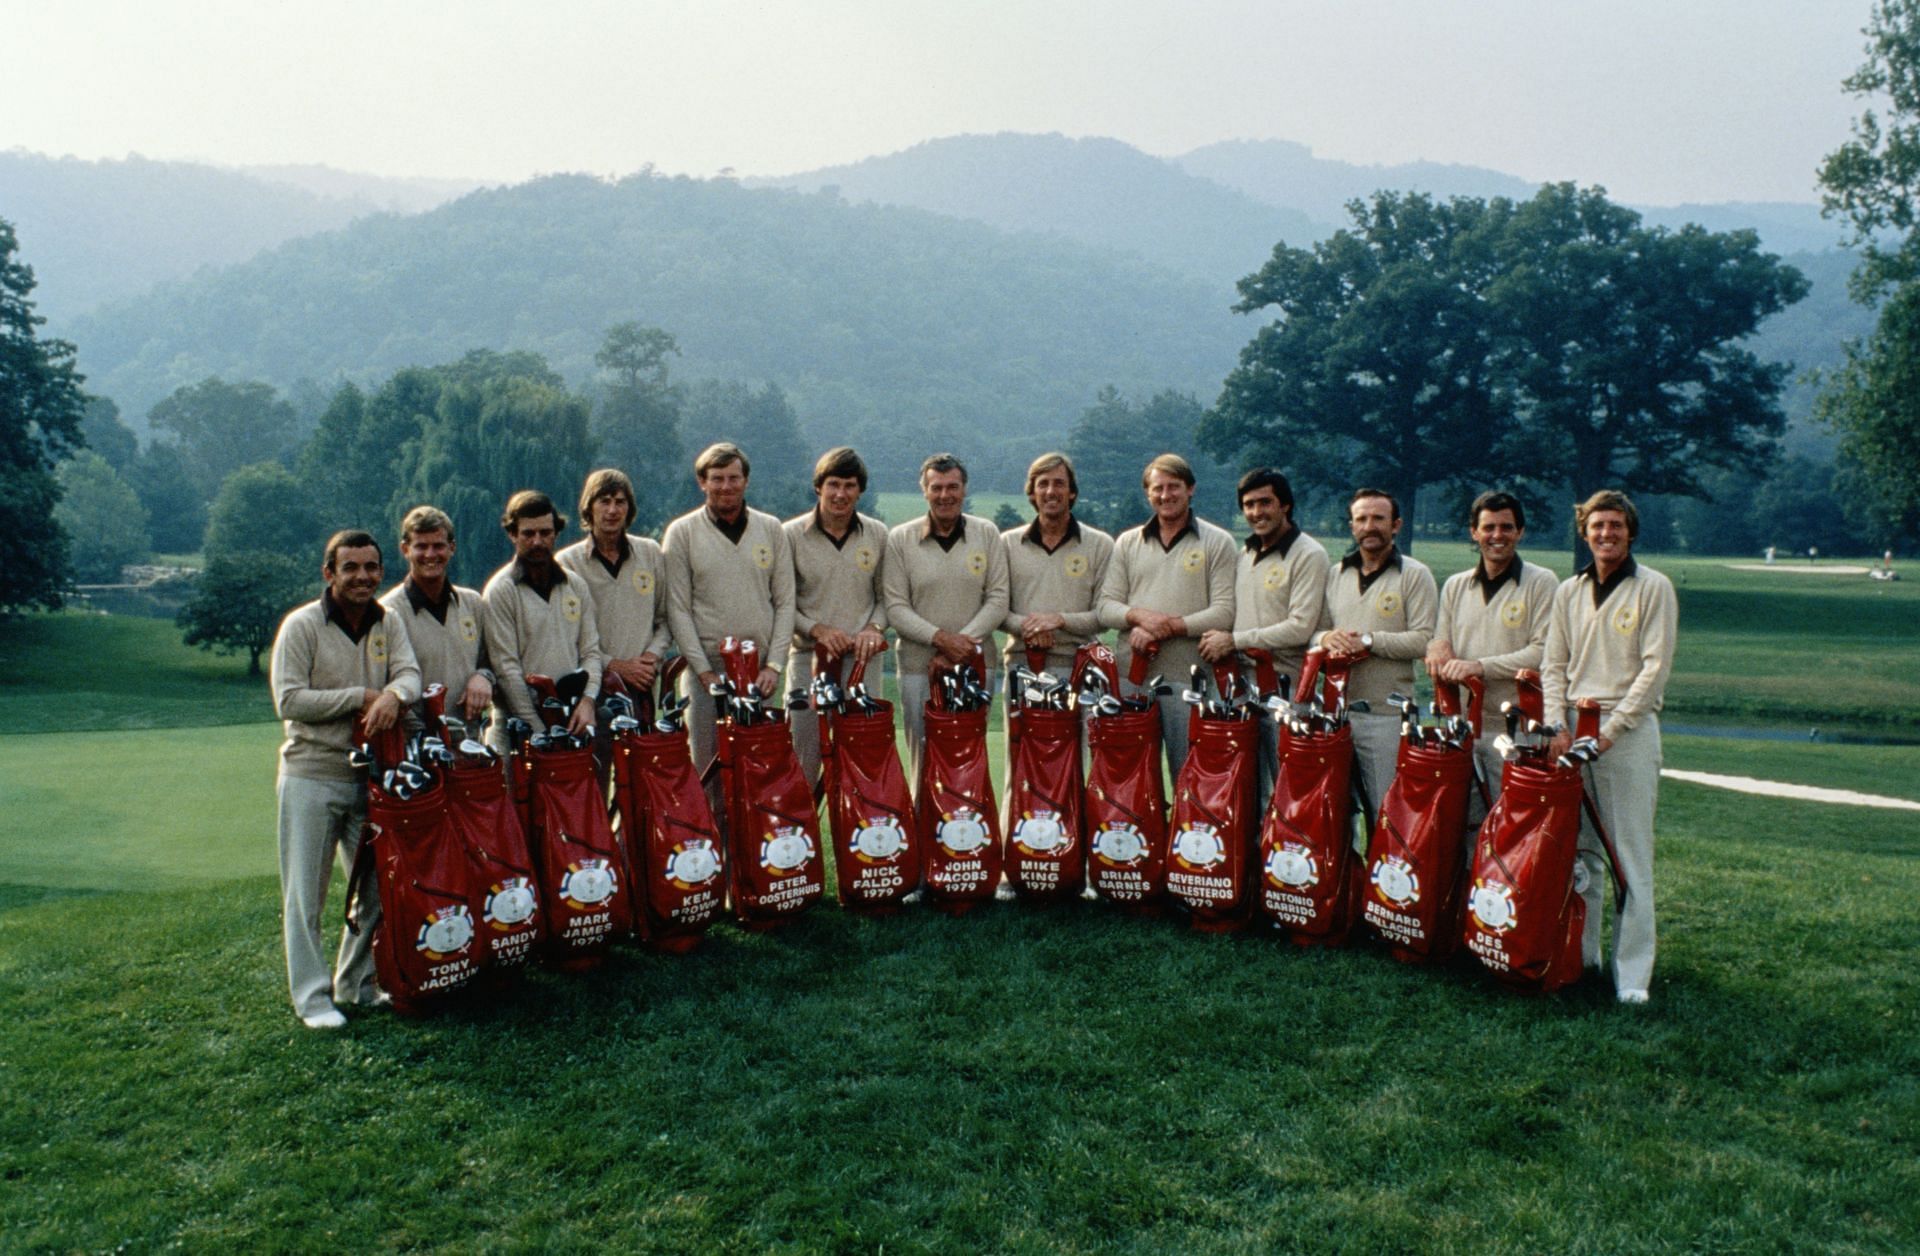 23rd Ryder Cup Matches 1979